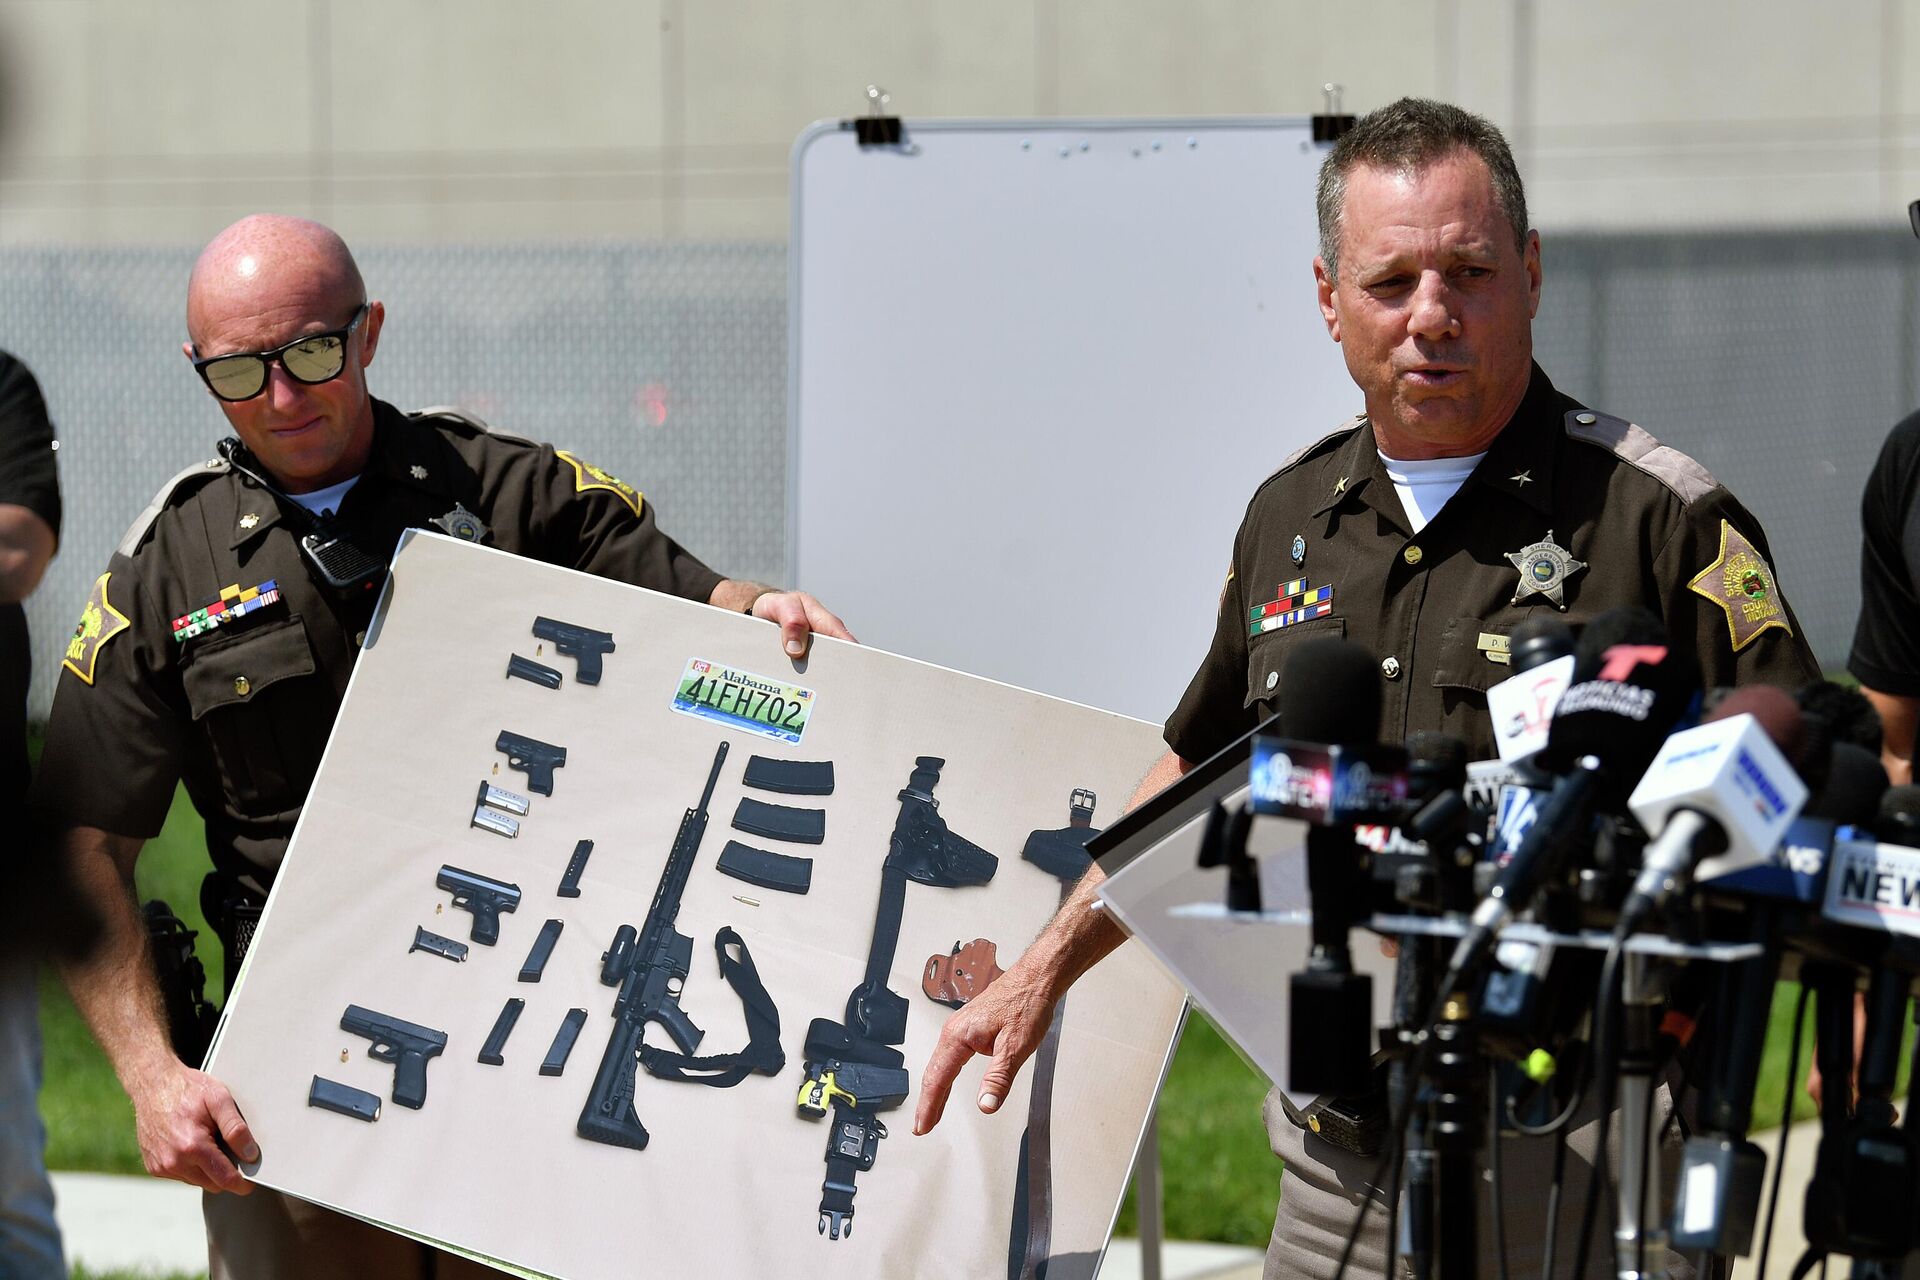 Vanderburgh County Sheriff Dave Wedding shows a photograph of the weapons that were found in the possession of fugitives Casey White and Vicky White following their capture during a press conference in Evansville, Ind., Tuesday, May 10, 2022.  - Sputnik International, 1920, 11.05.2022